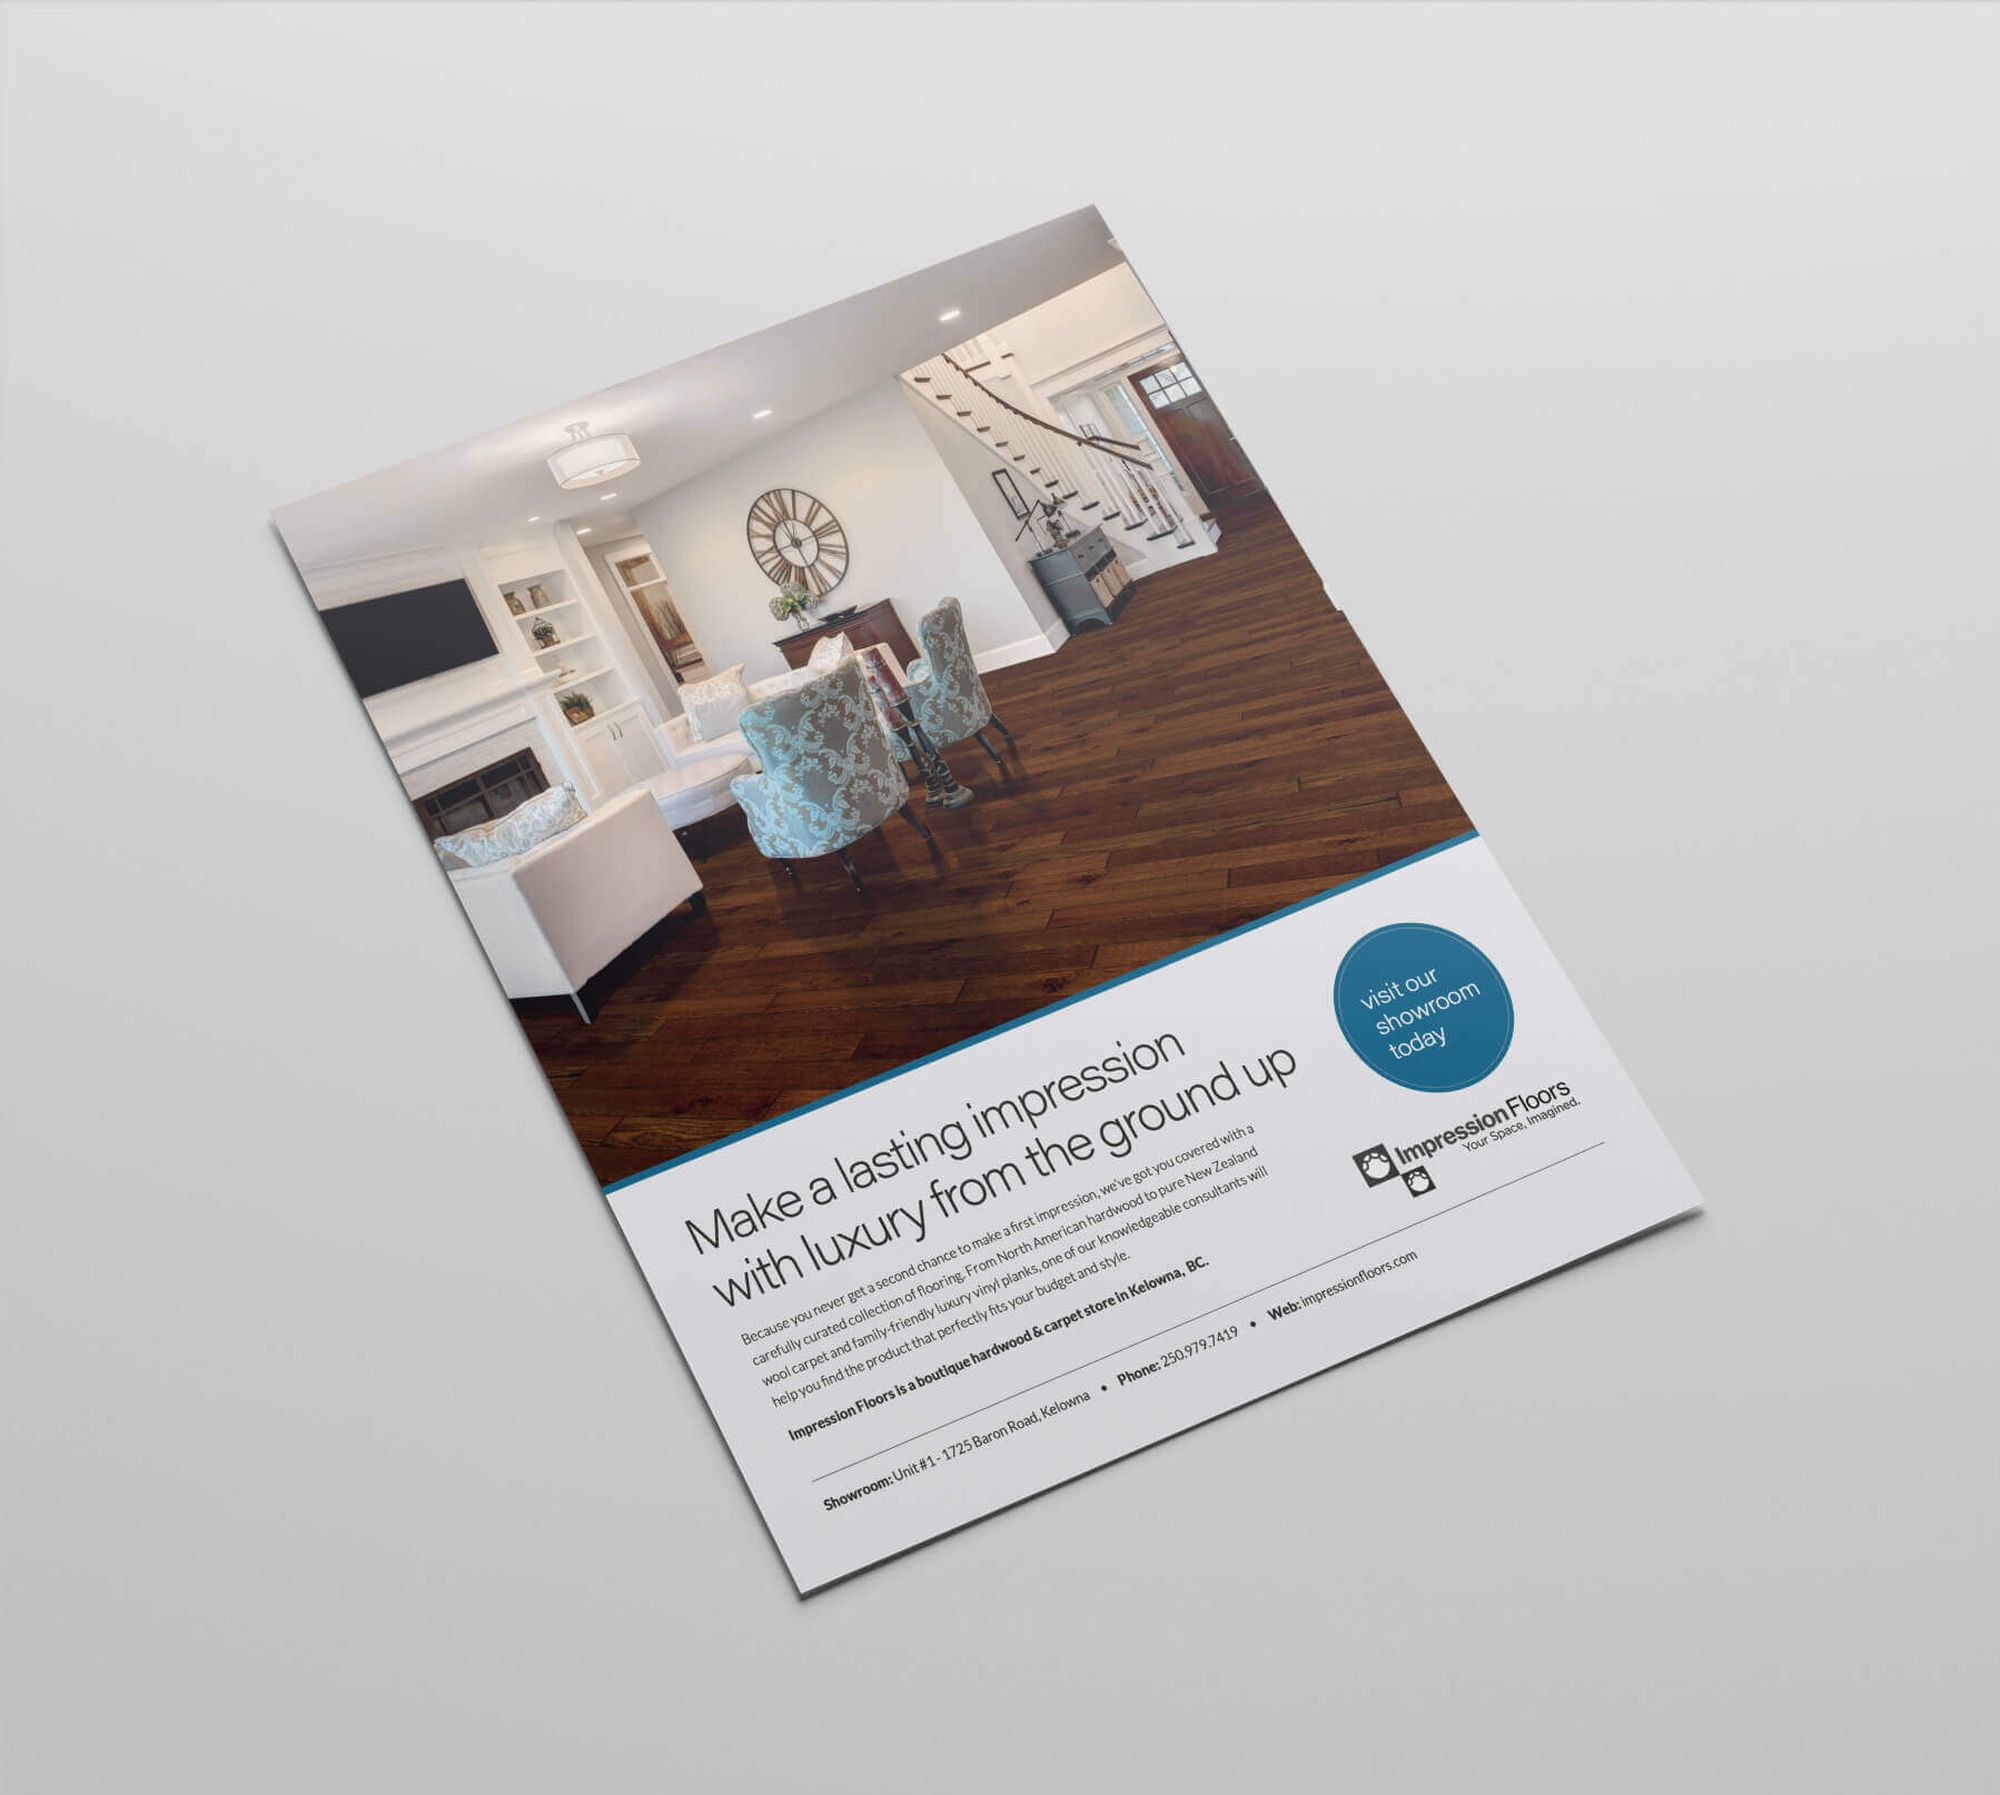 An advertising flyer created by Exquison Marketing for a Vancouver furniture store.